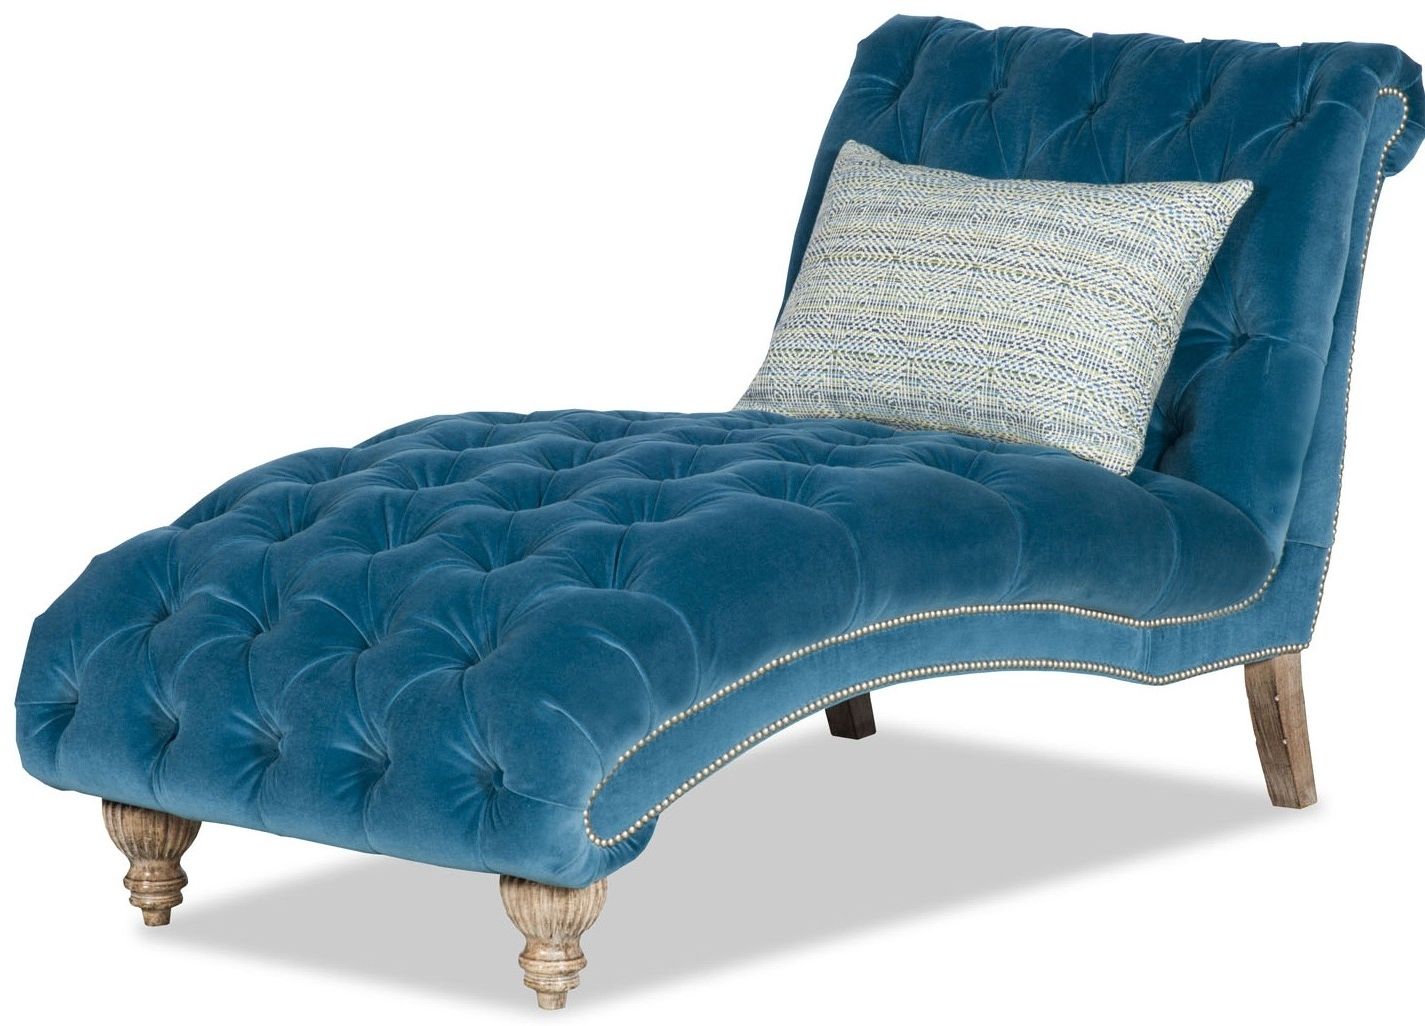 Peacock Blue Chaise Lounge Within Current Velvet Chaise Lounges (View 10 of 15)